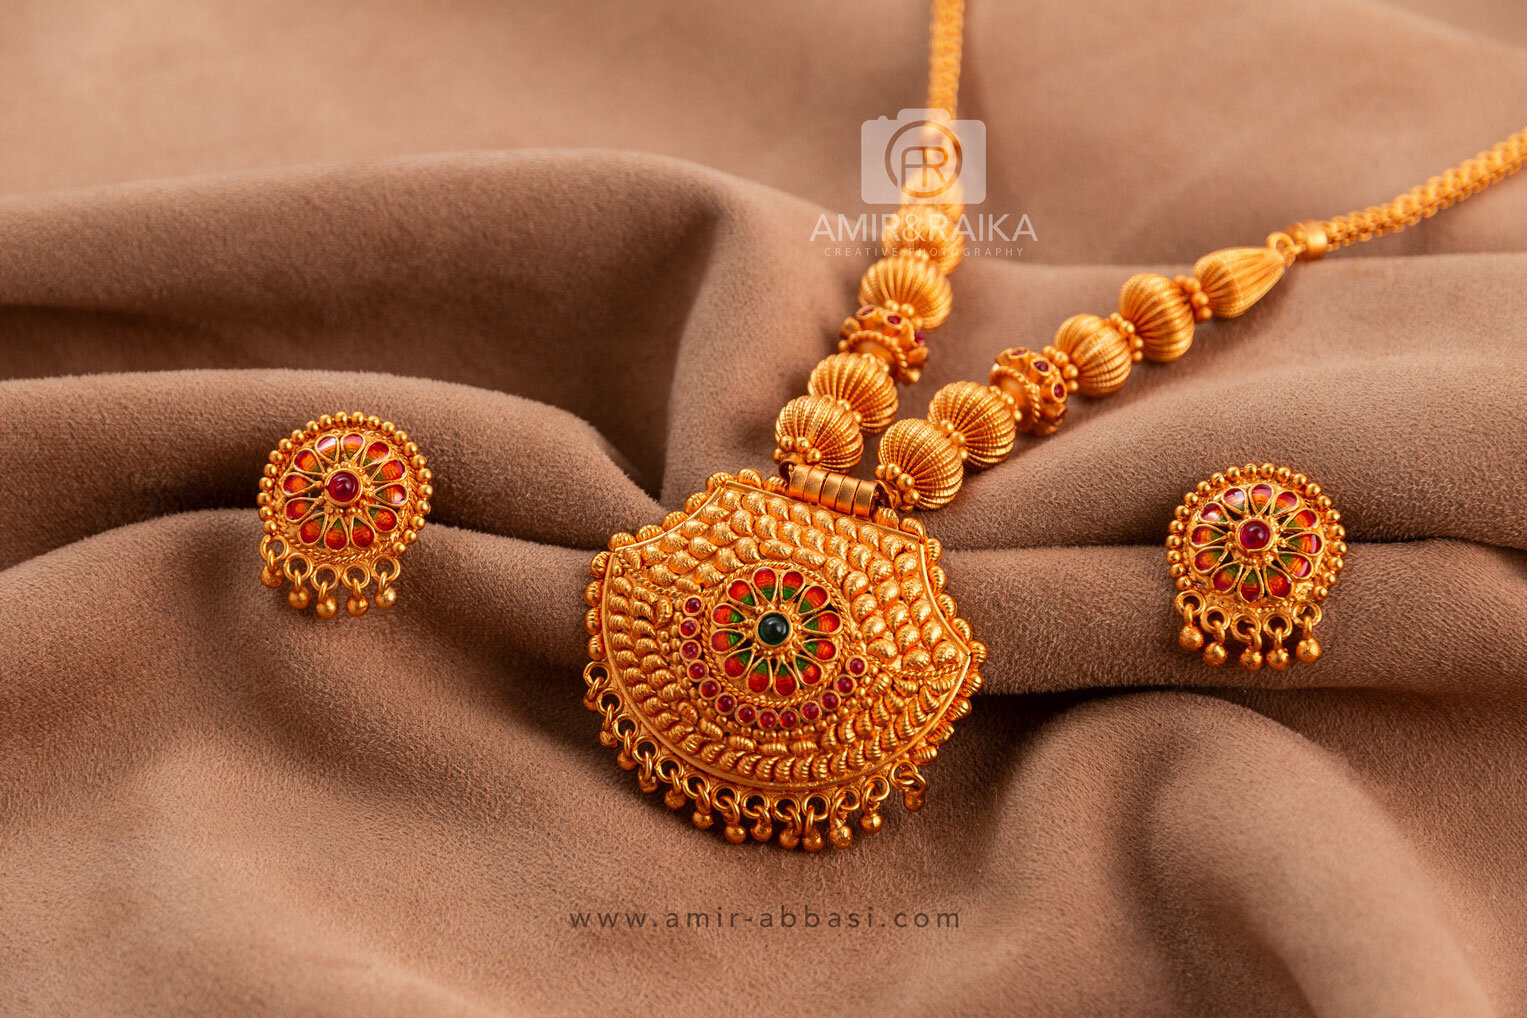 Affordable Jewellery Photography in Mumbai